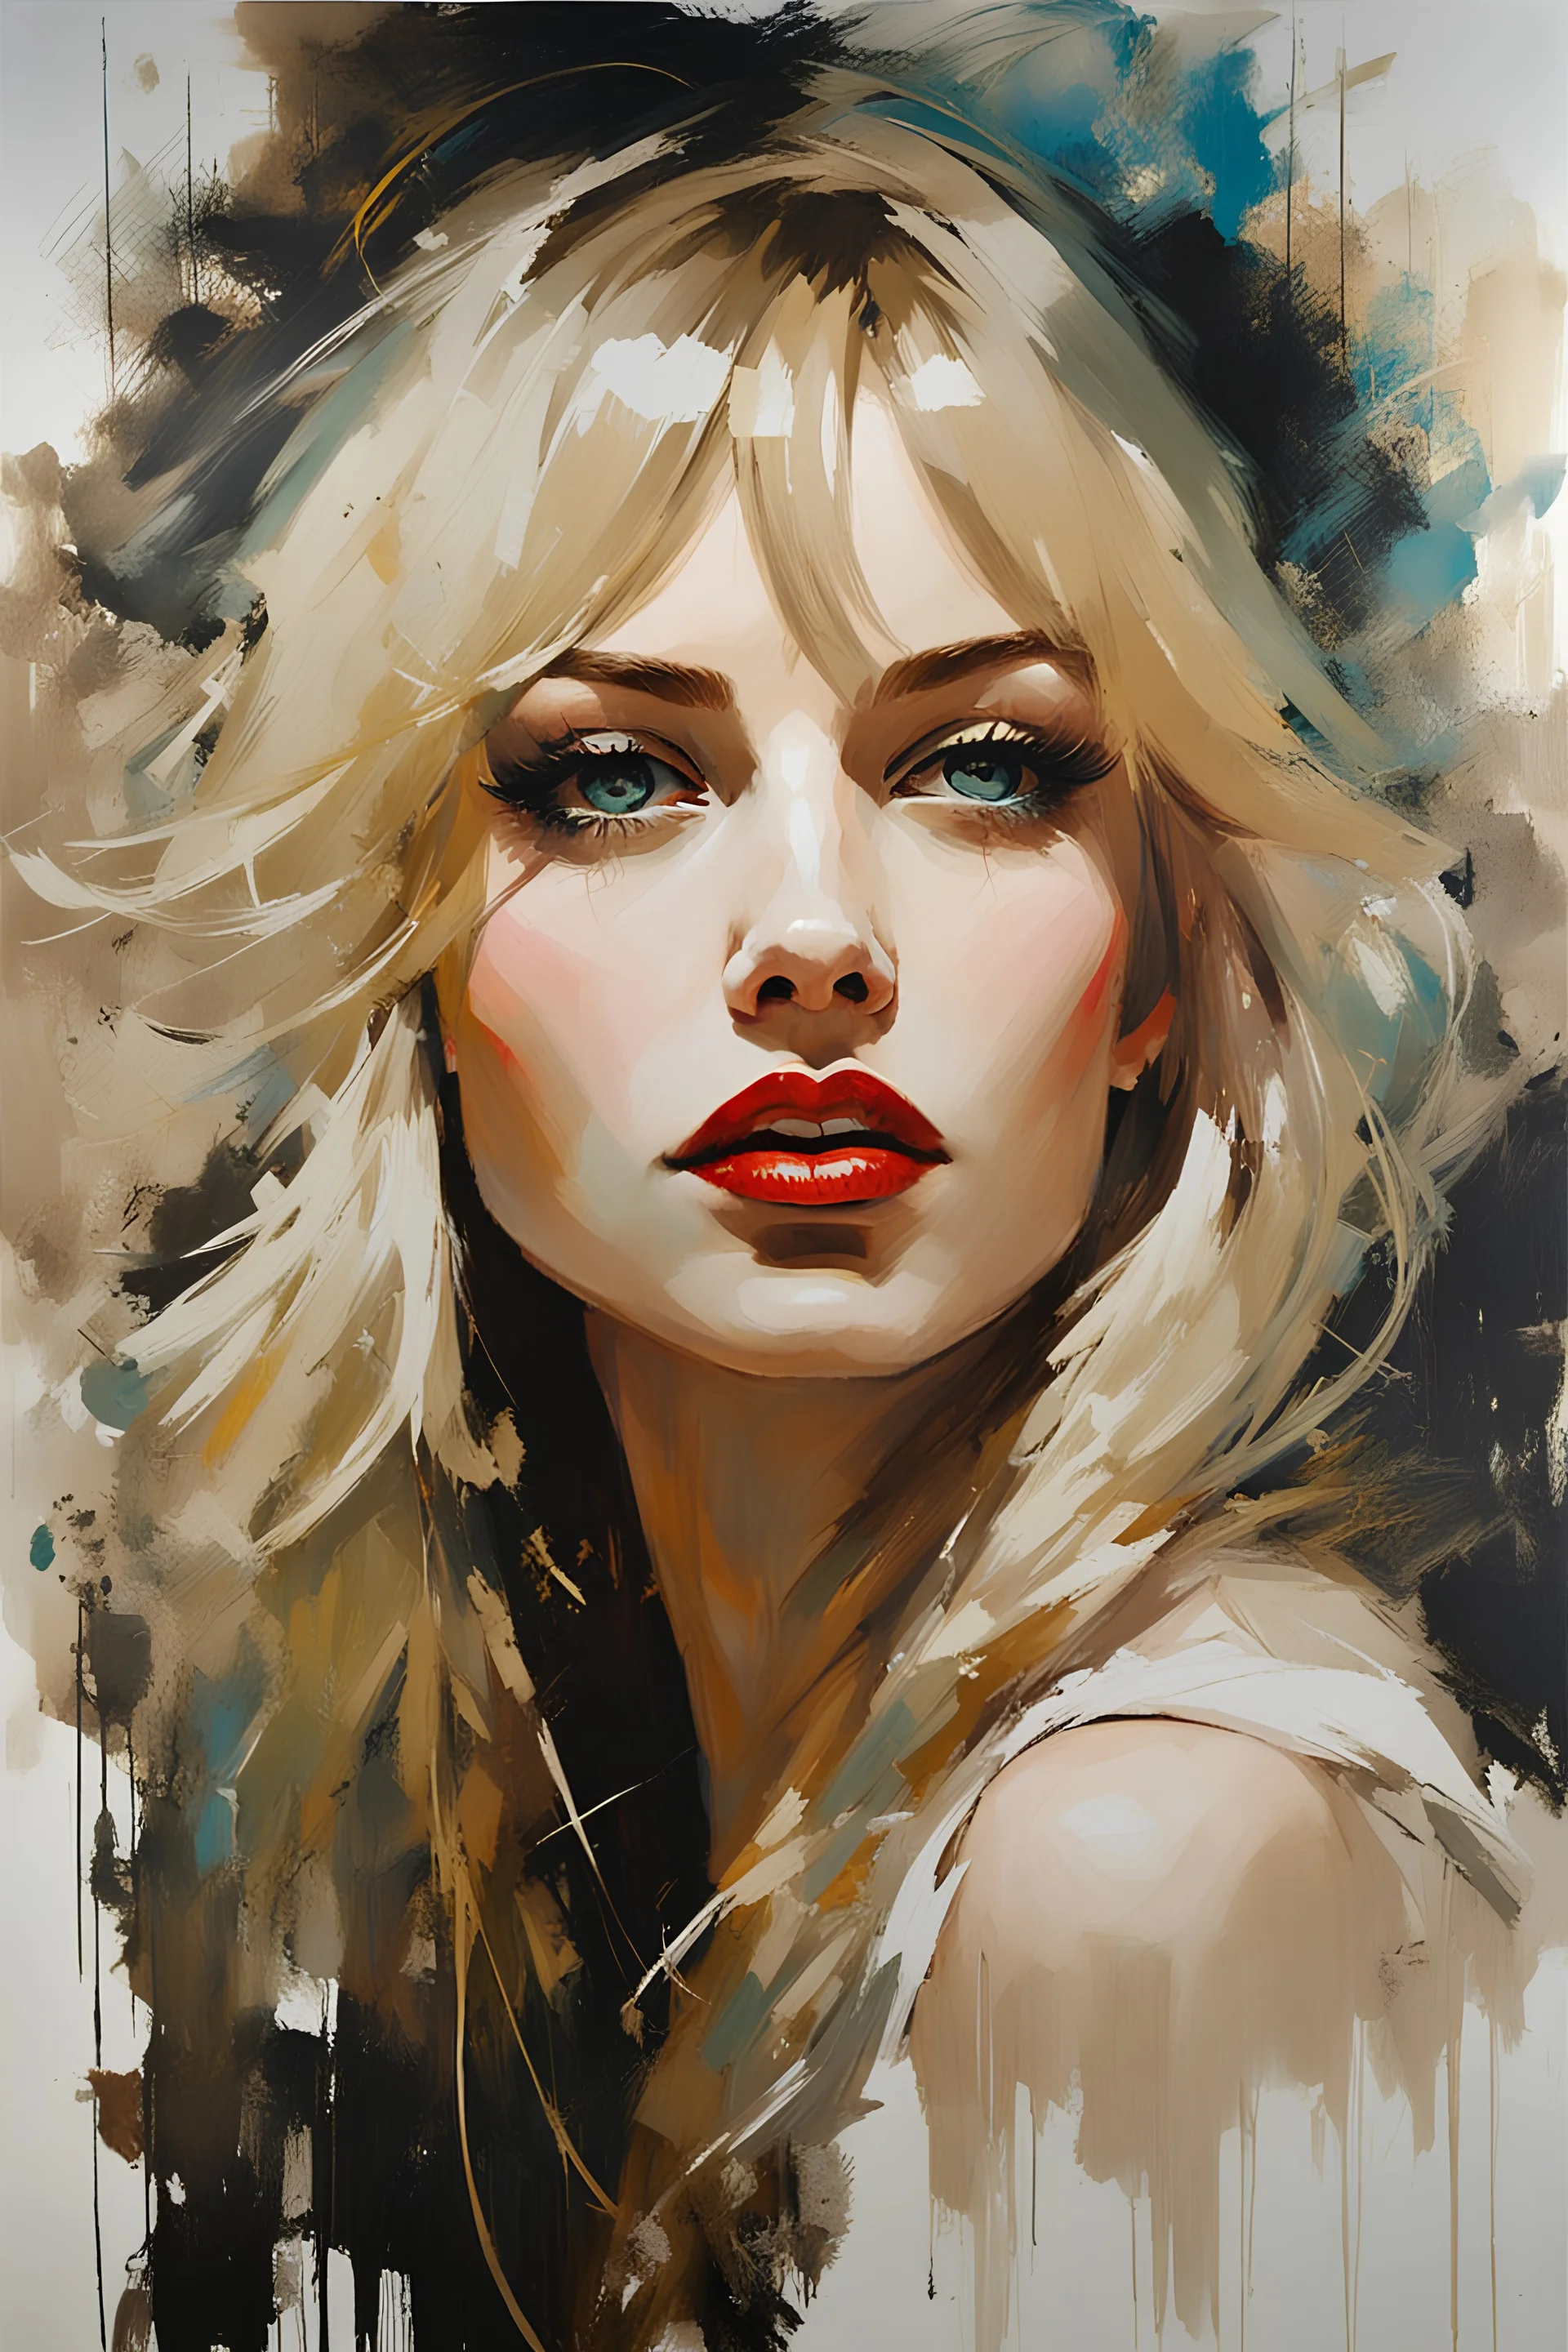 Blonde Pale Thin well endowed Scandinavian Woman 24yo, Big Eyes, red lipstick, Long Eyelashes And Eye Shadow smiling :: by Robert McGinnis + Jeremy Mann + Carne Griffiths + Leonid Afremov, black canvas, clear outlining, detailed